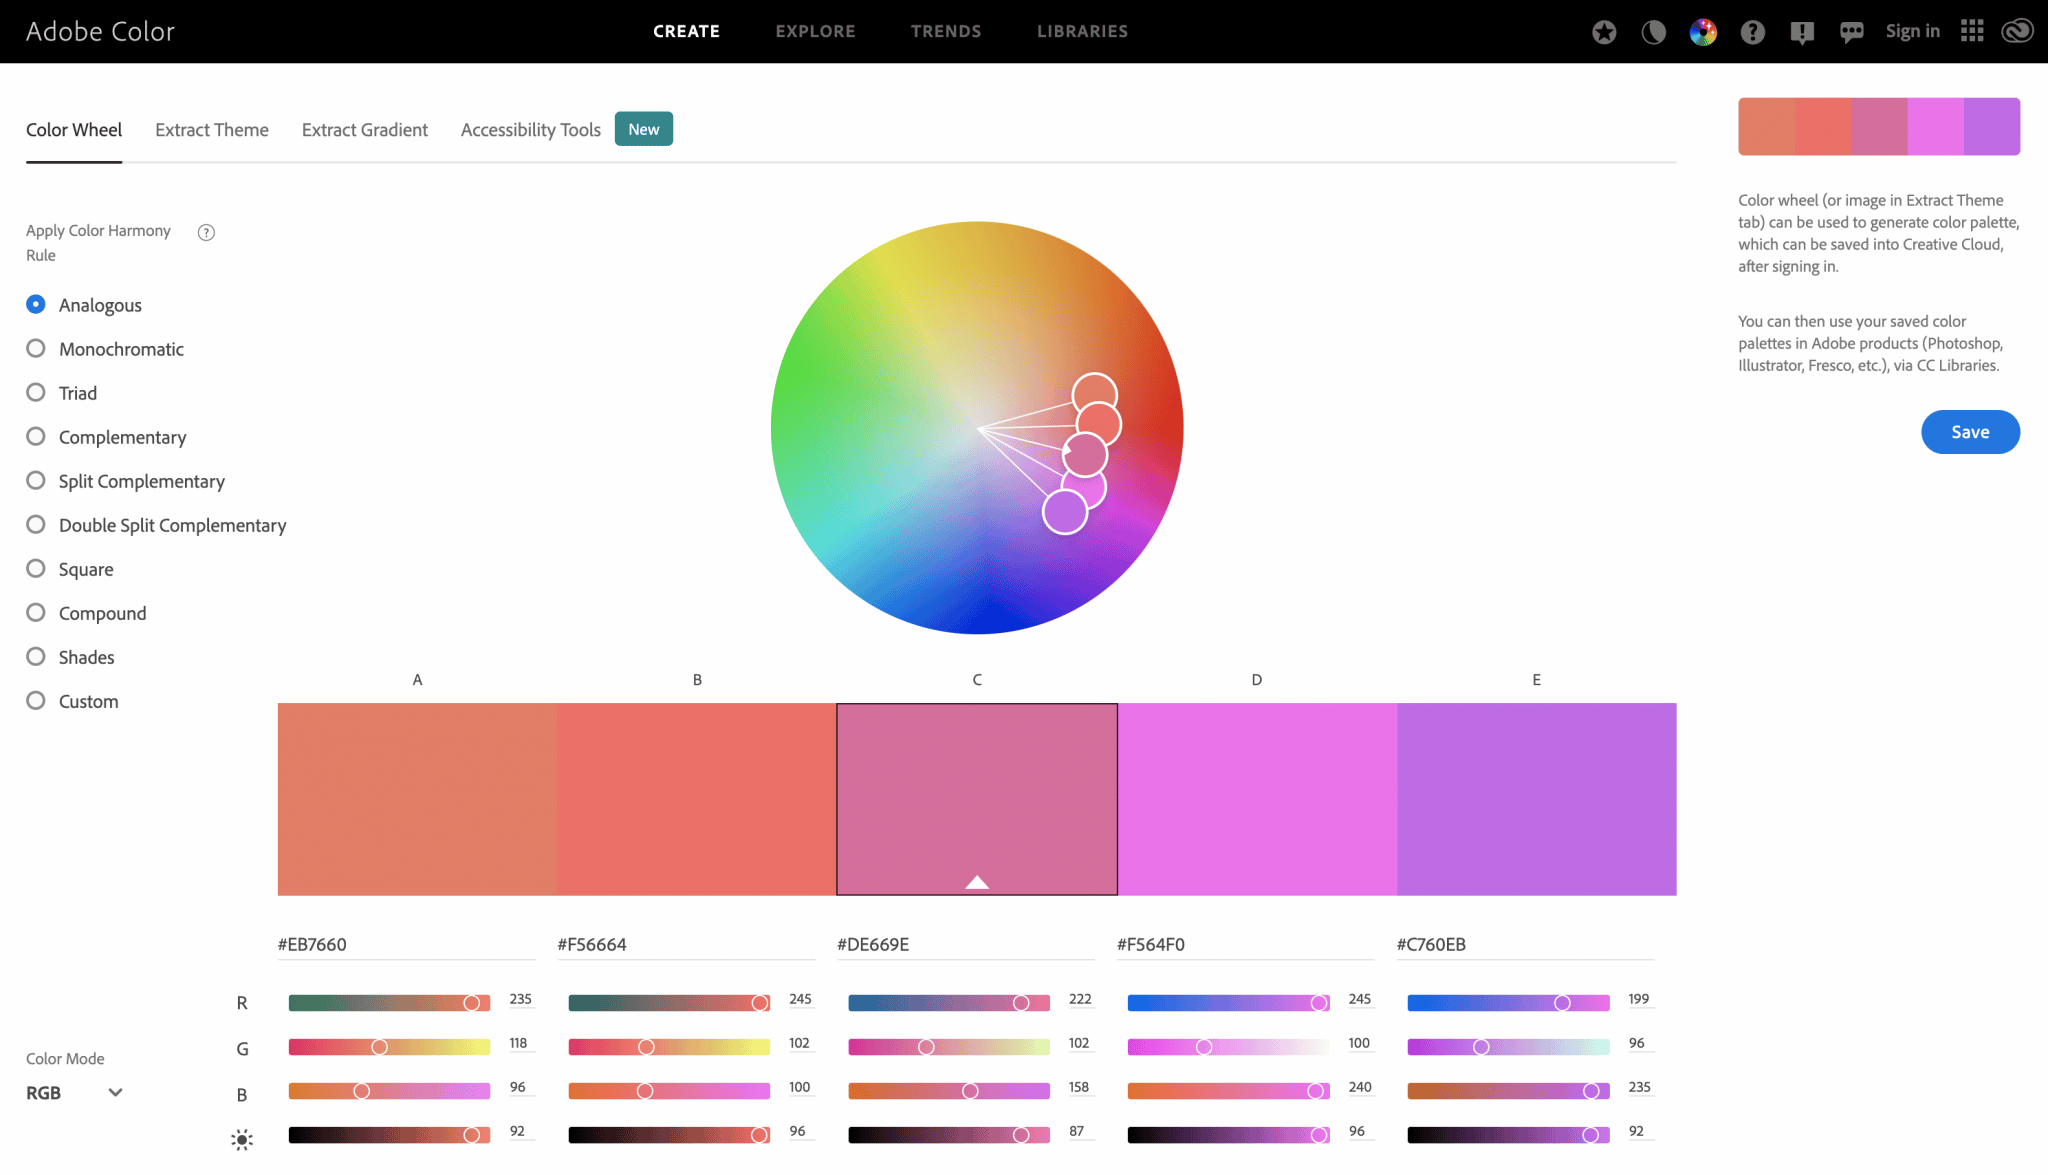 Adobe Color is a color wheel, available online, that you can use to fine-tune the color shades of your WordPress site.